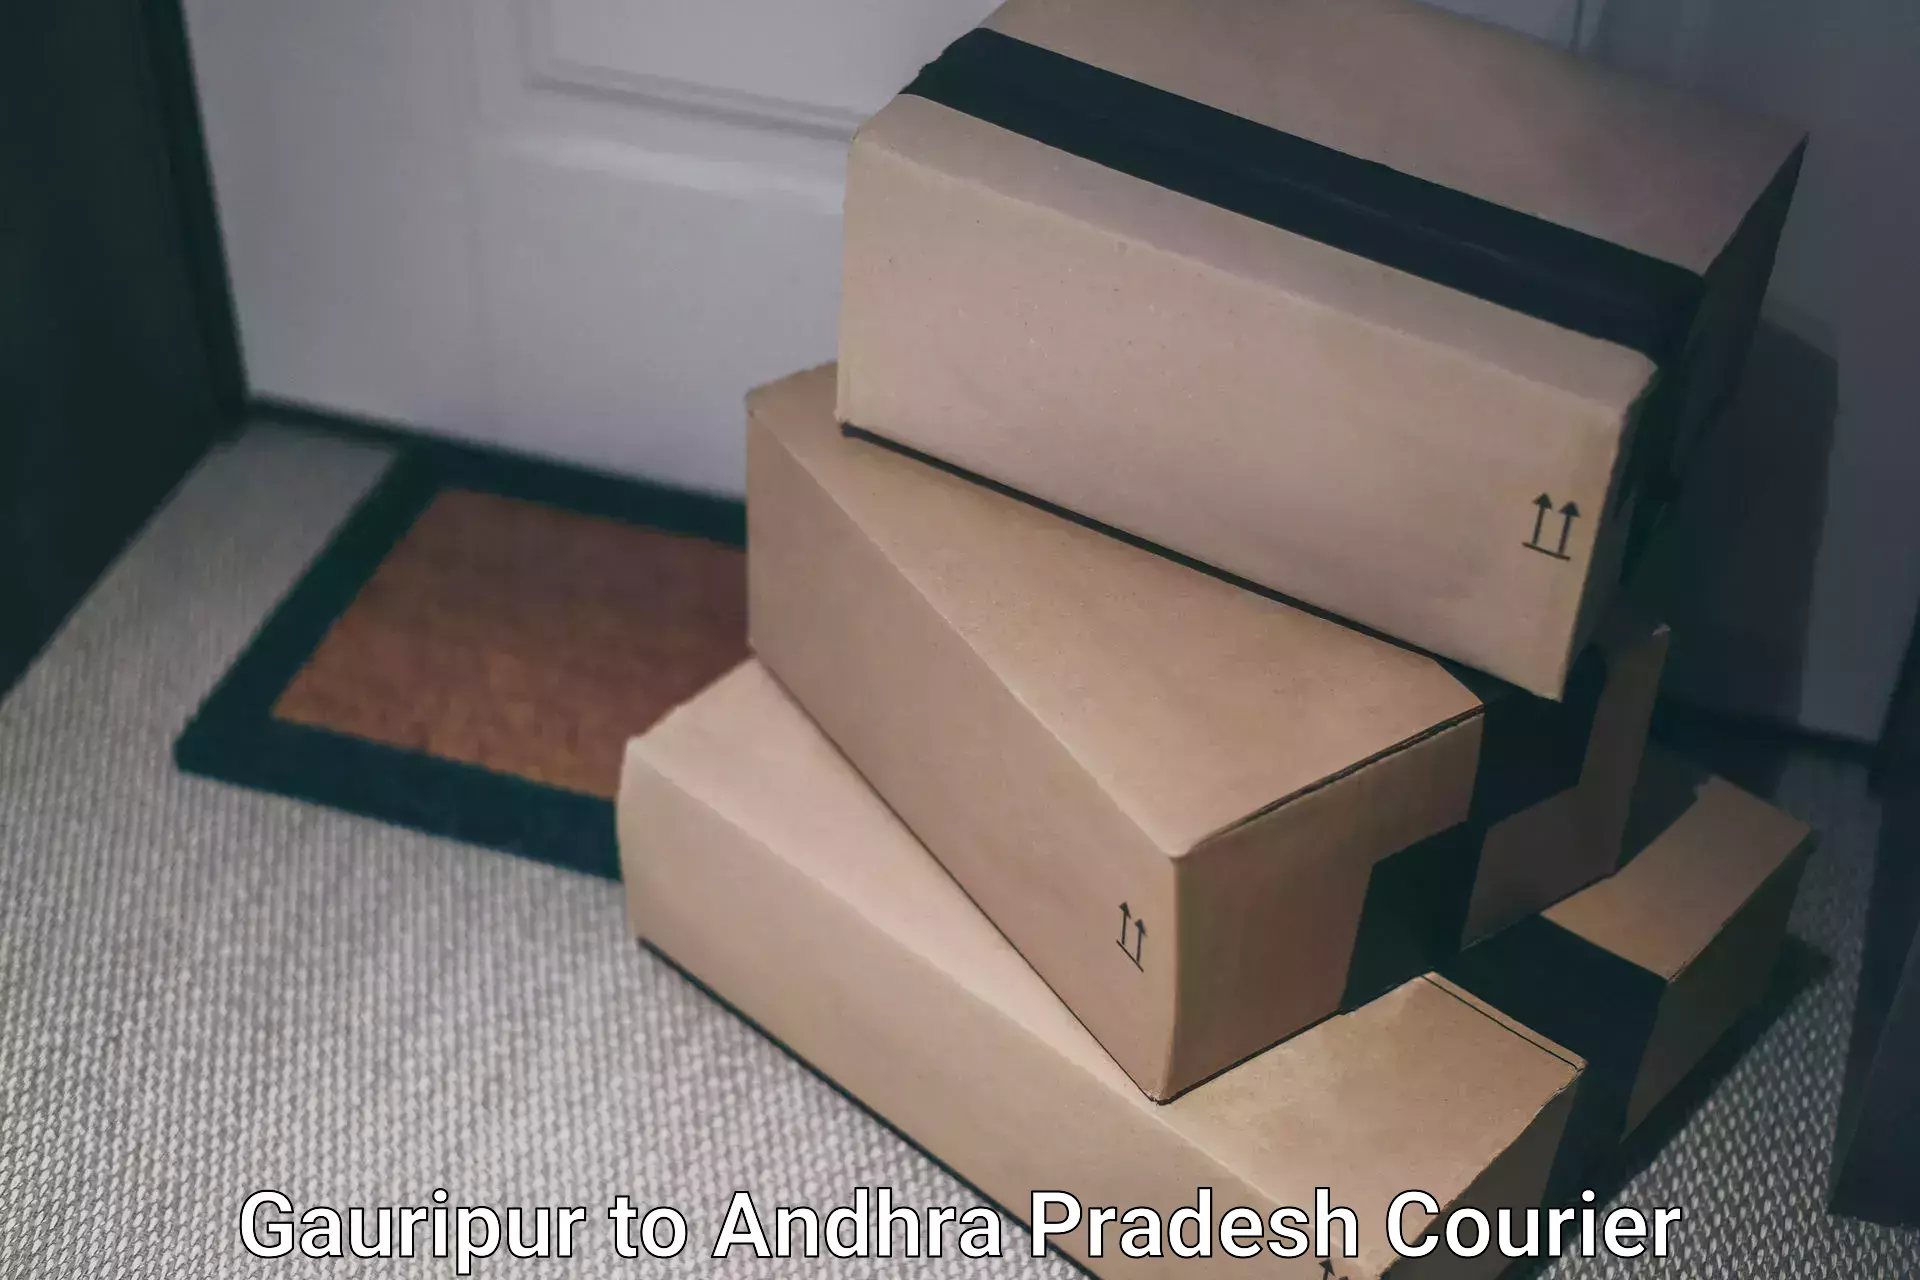 Large-scale shipping solutions Gauripur to Gampalagudem